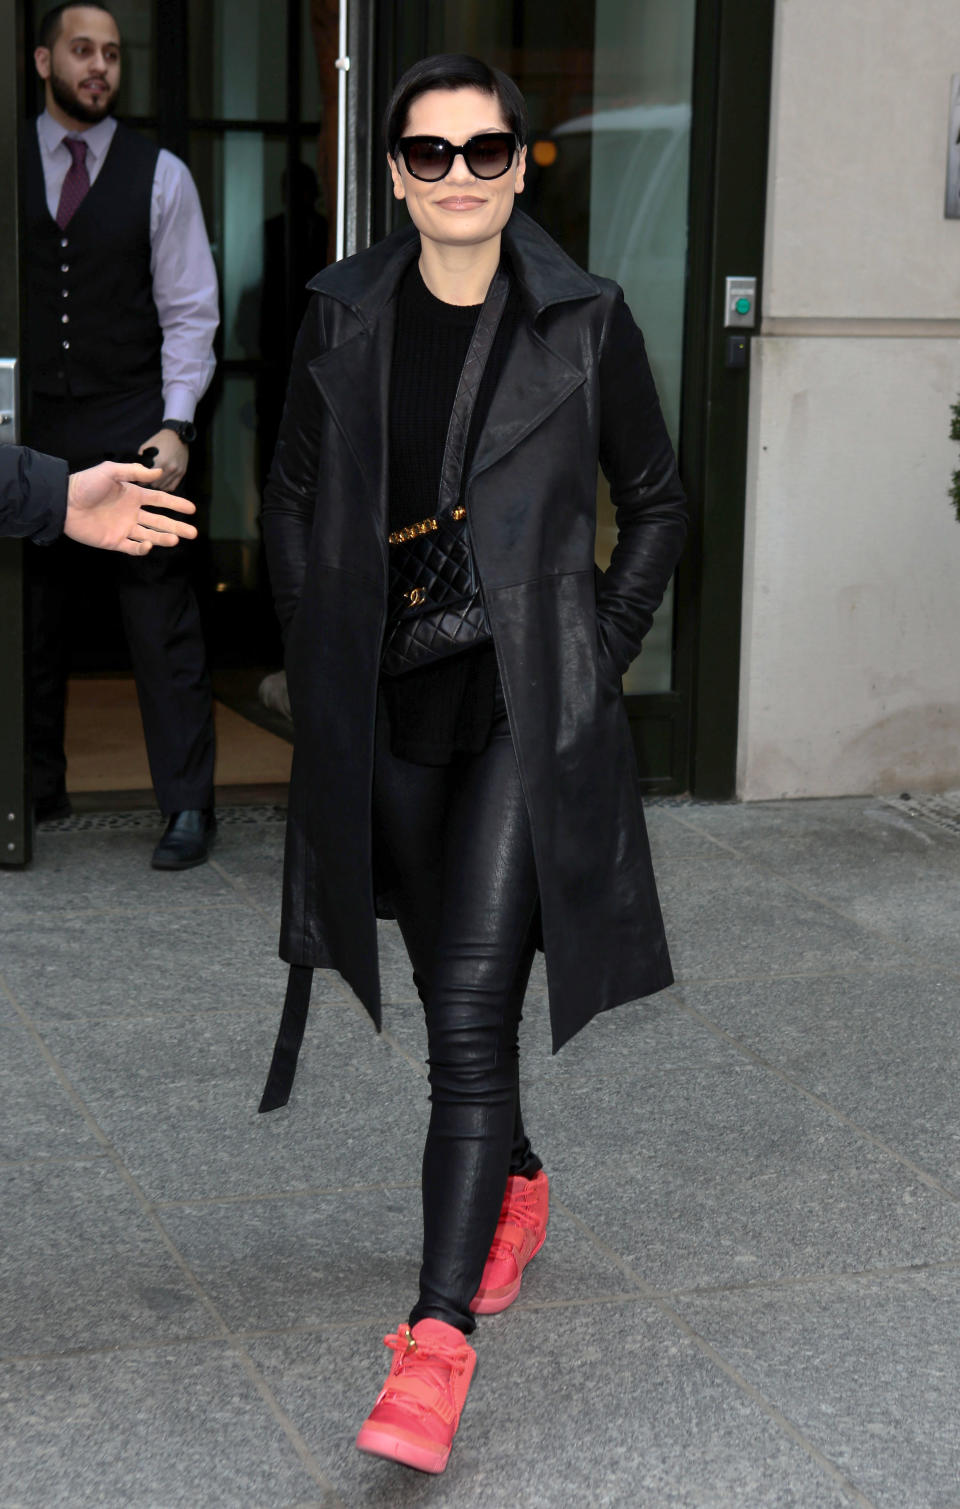 Jessie J walks down the street in faux leather leggings and sunglasses